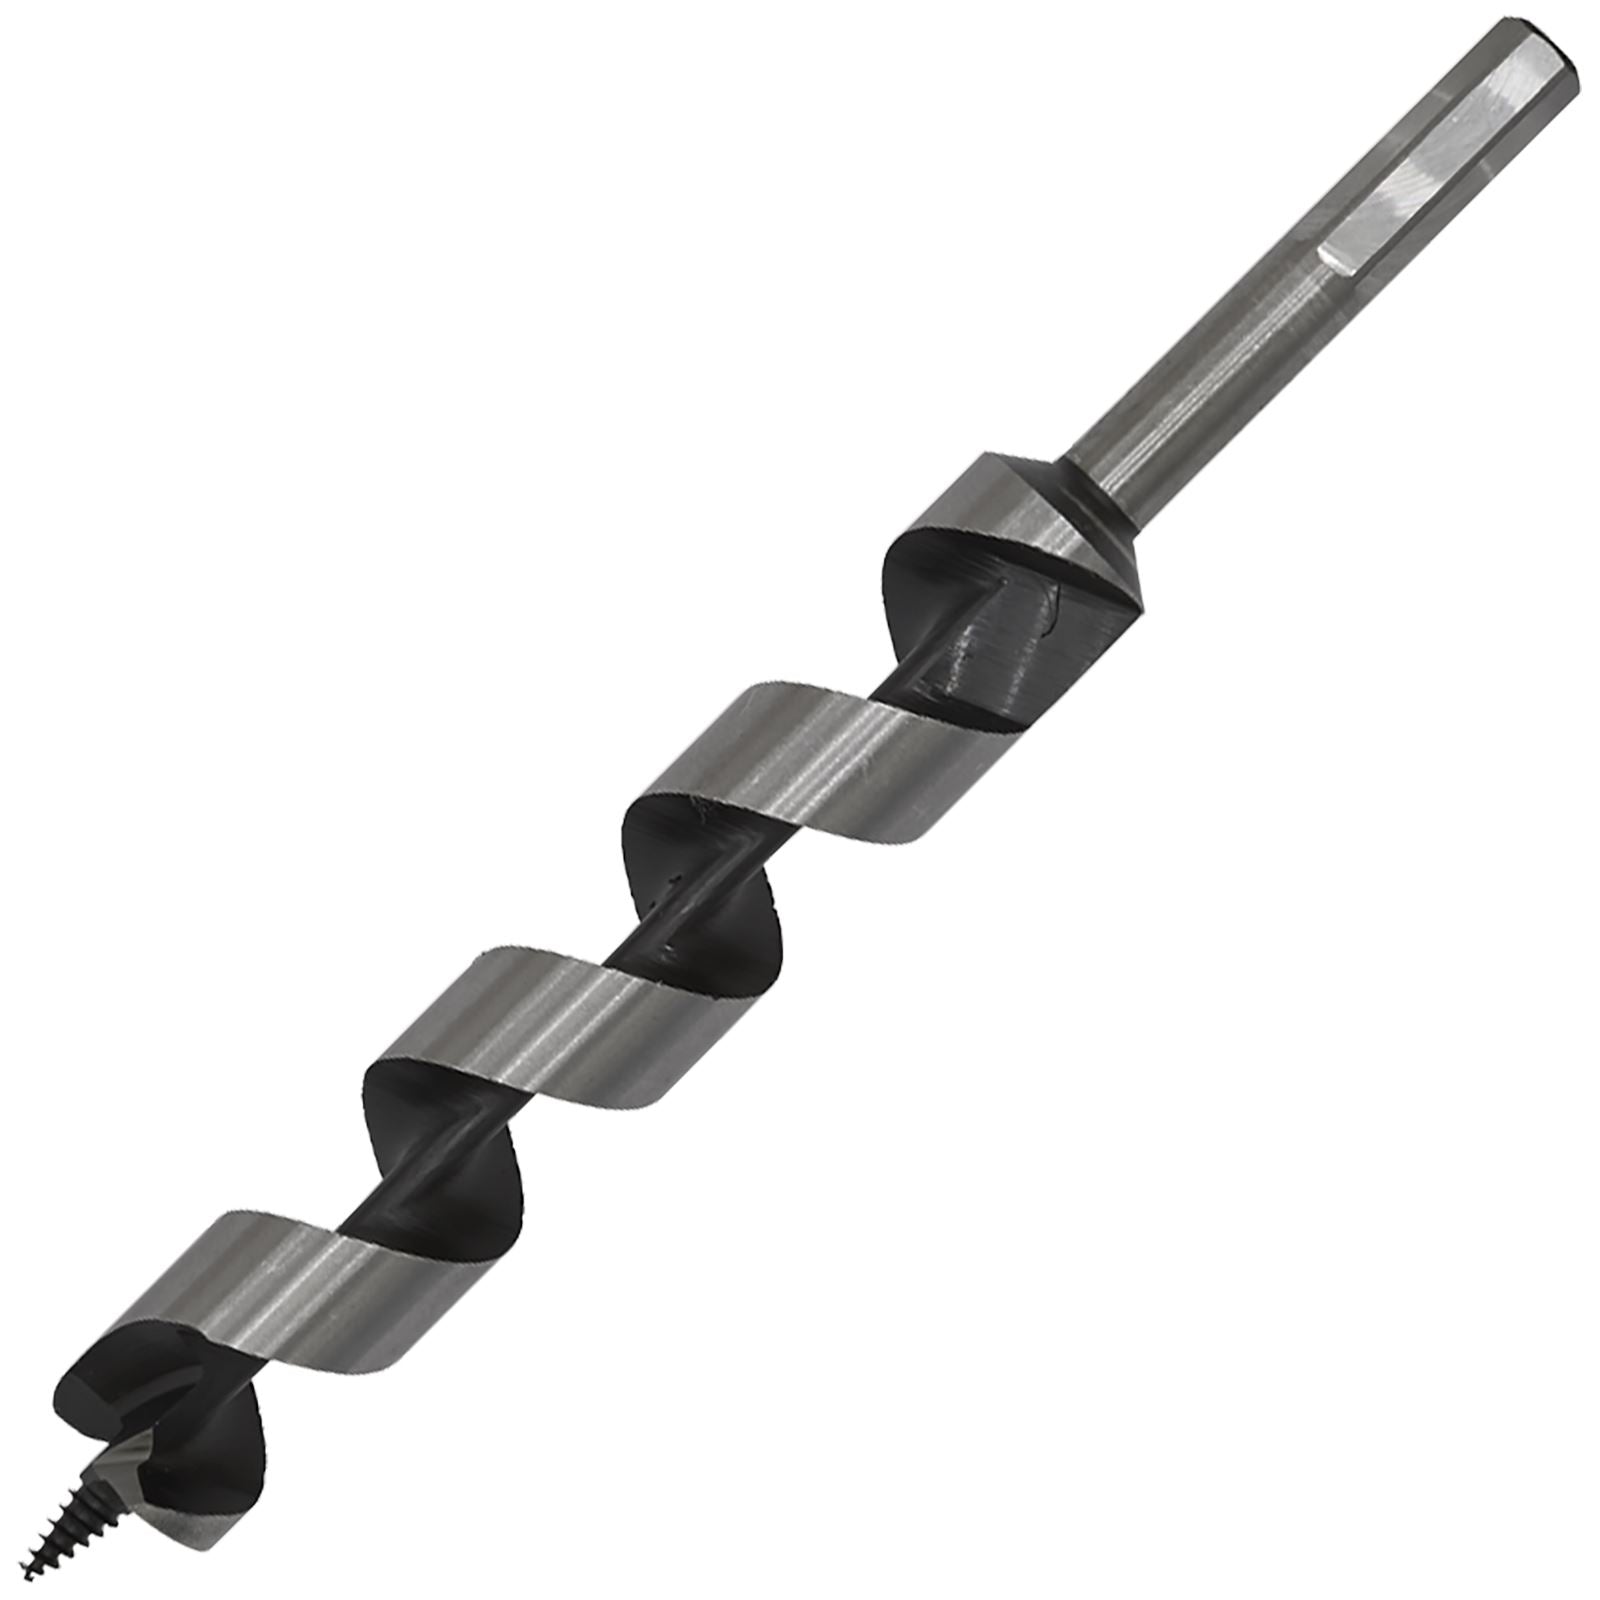 Worksafe by Sealey Auger Wood Drill Bit 25mm x 235mm